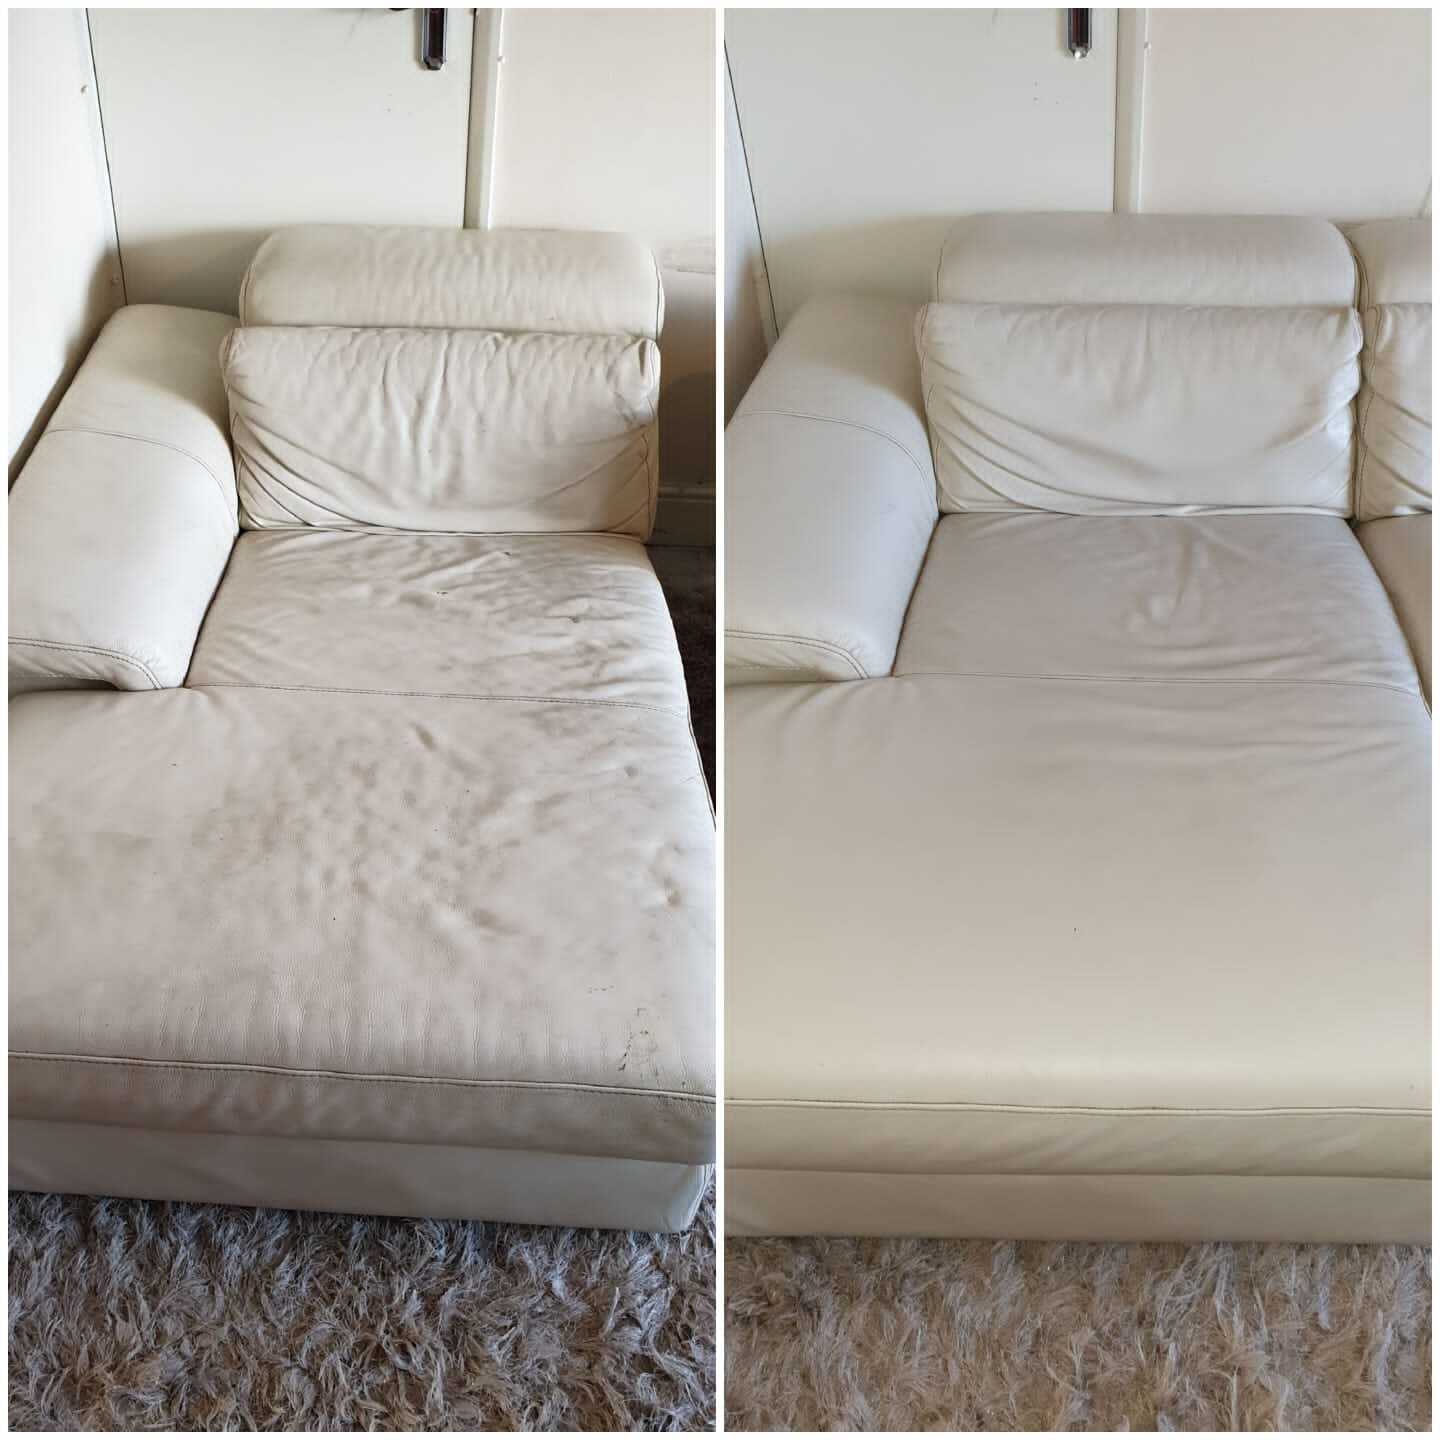 Sofa before and after cleaning